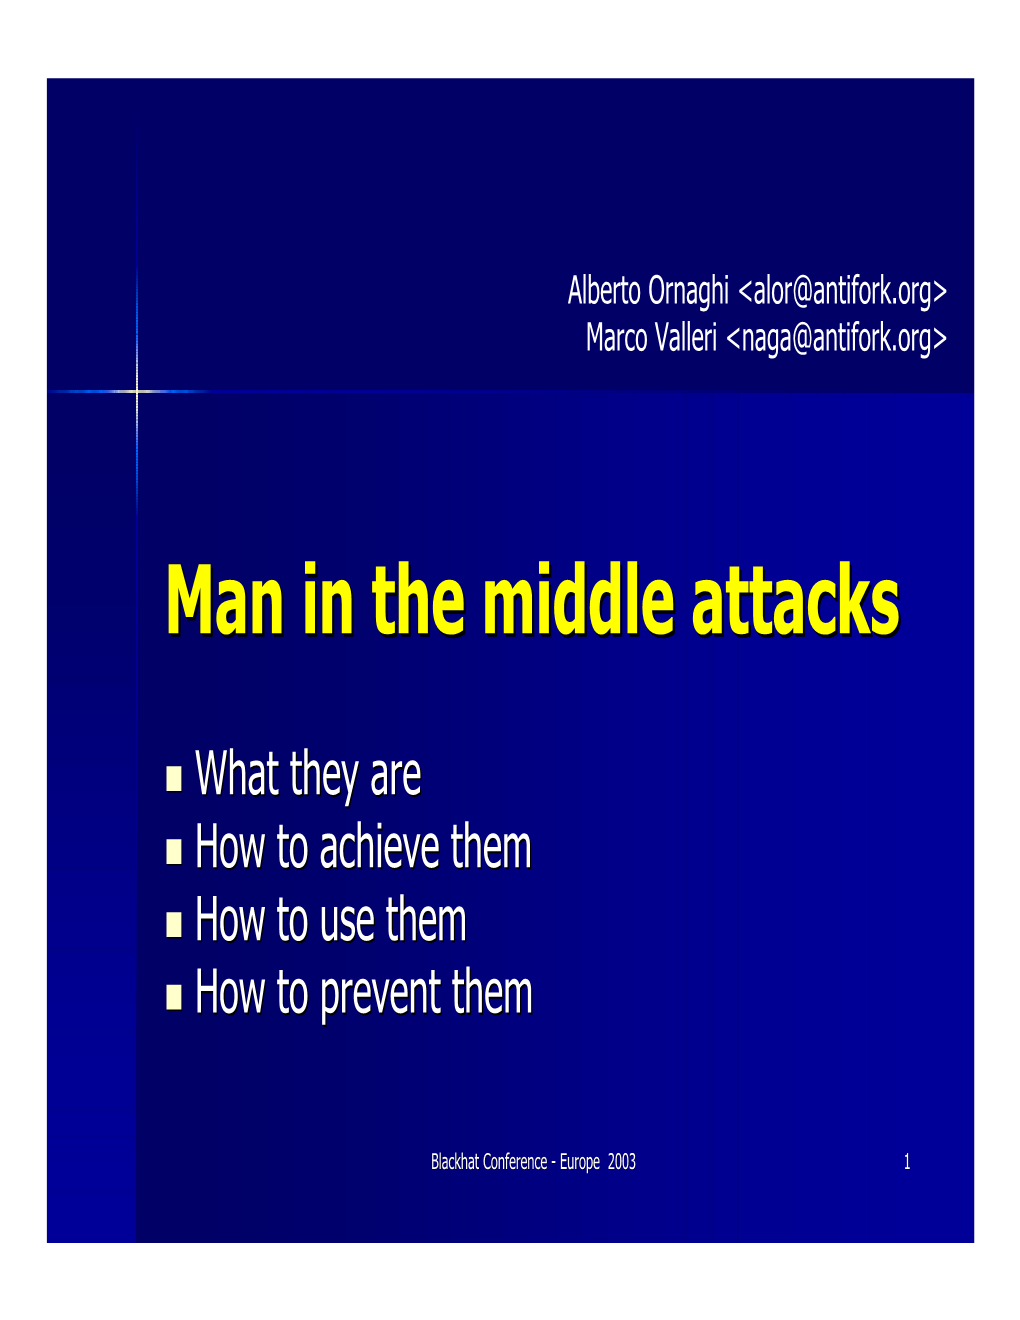 Man in the Middle Attacks